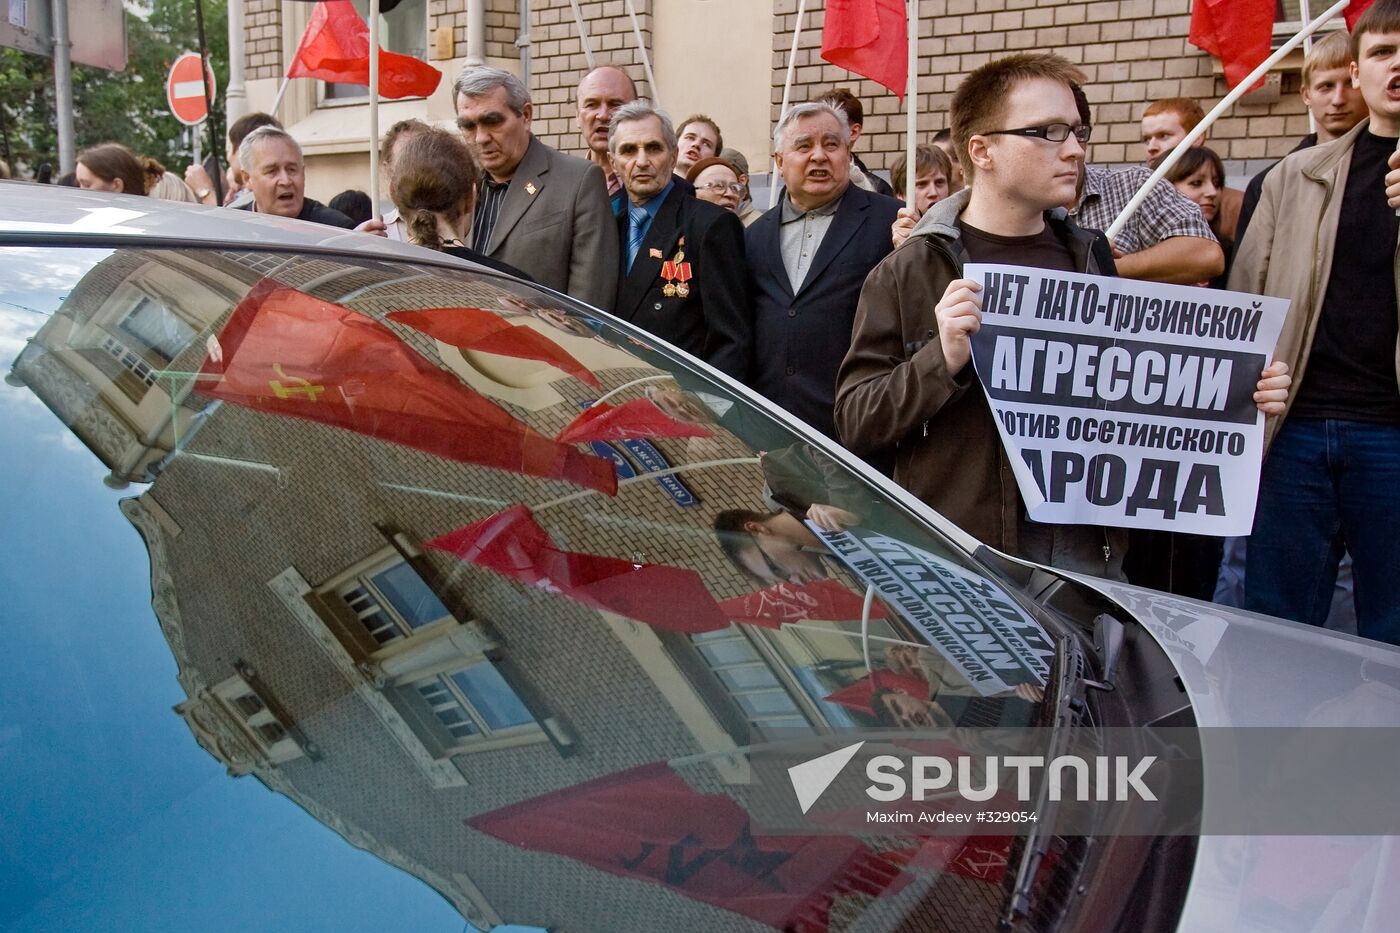 Rally outside Georgian Embassy in Moscow